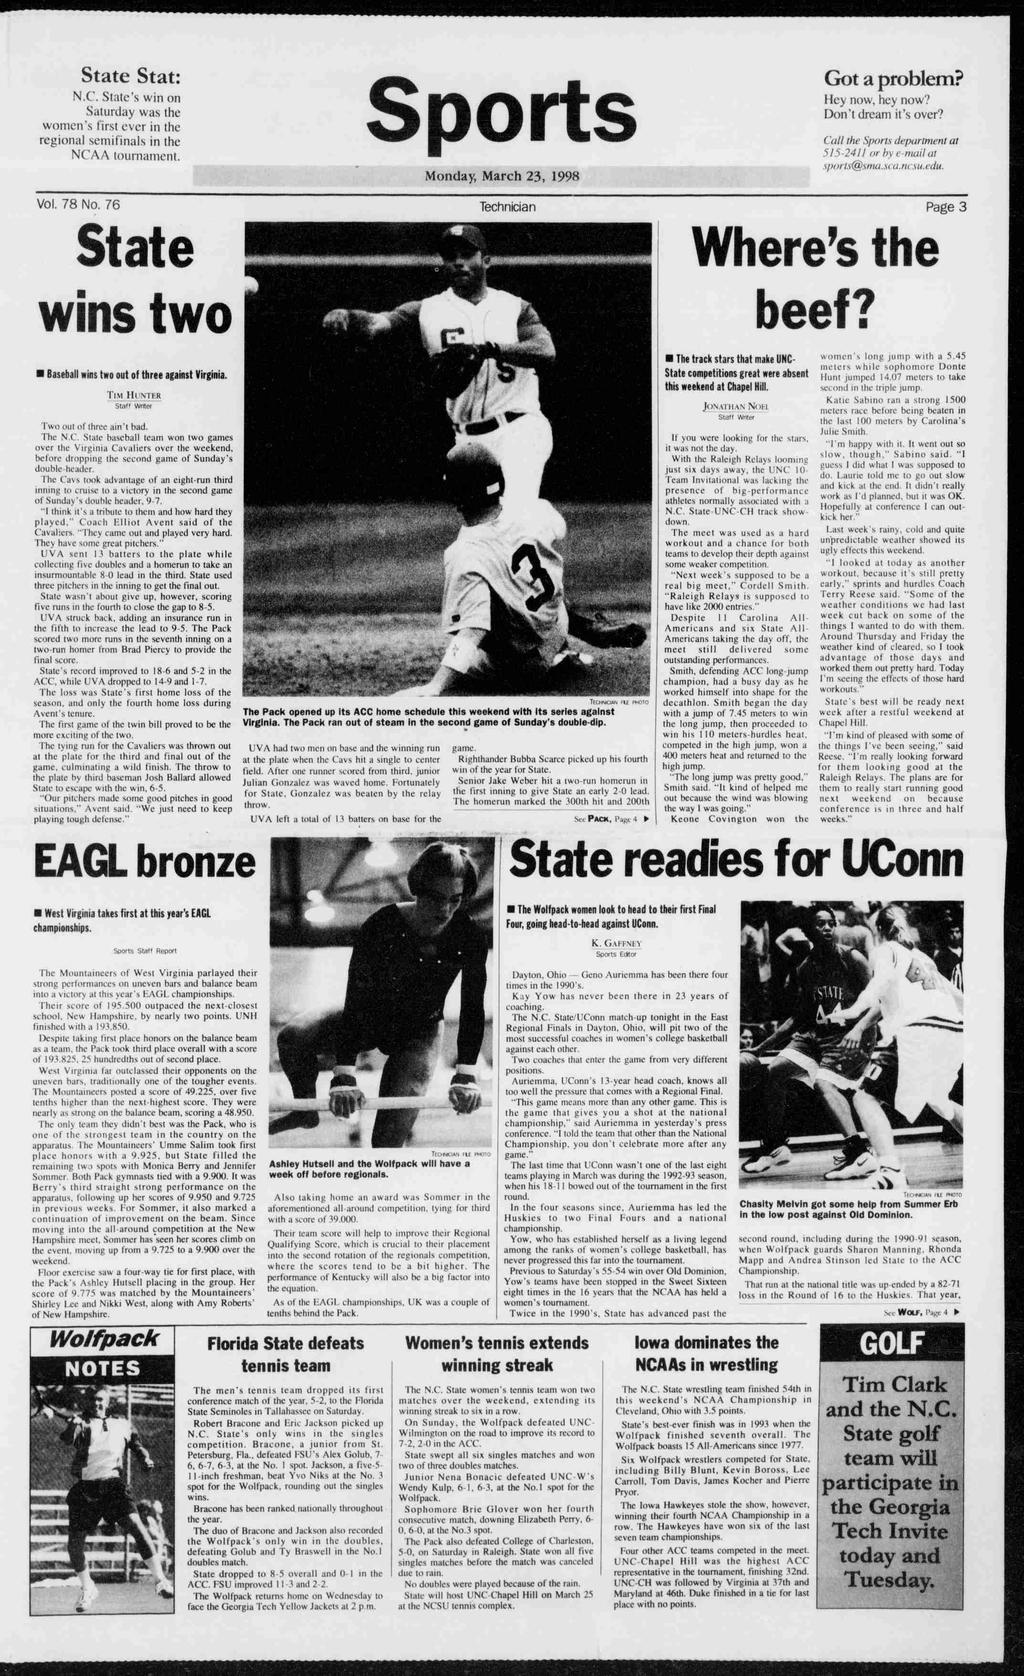 State Stat: NC. State s wn on Saturday was the women's frst ever n the regona semfnas n the NCAA tournament. Vo. 78 NO. 76 Sports Monday, March 23, 1998 Techncan Got a probem? Hey now. hey now.